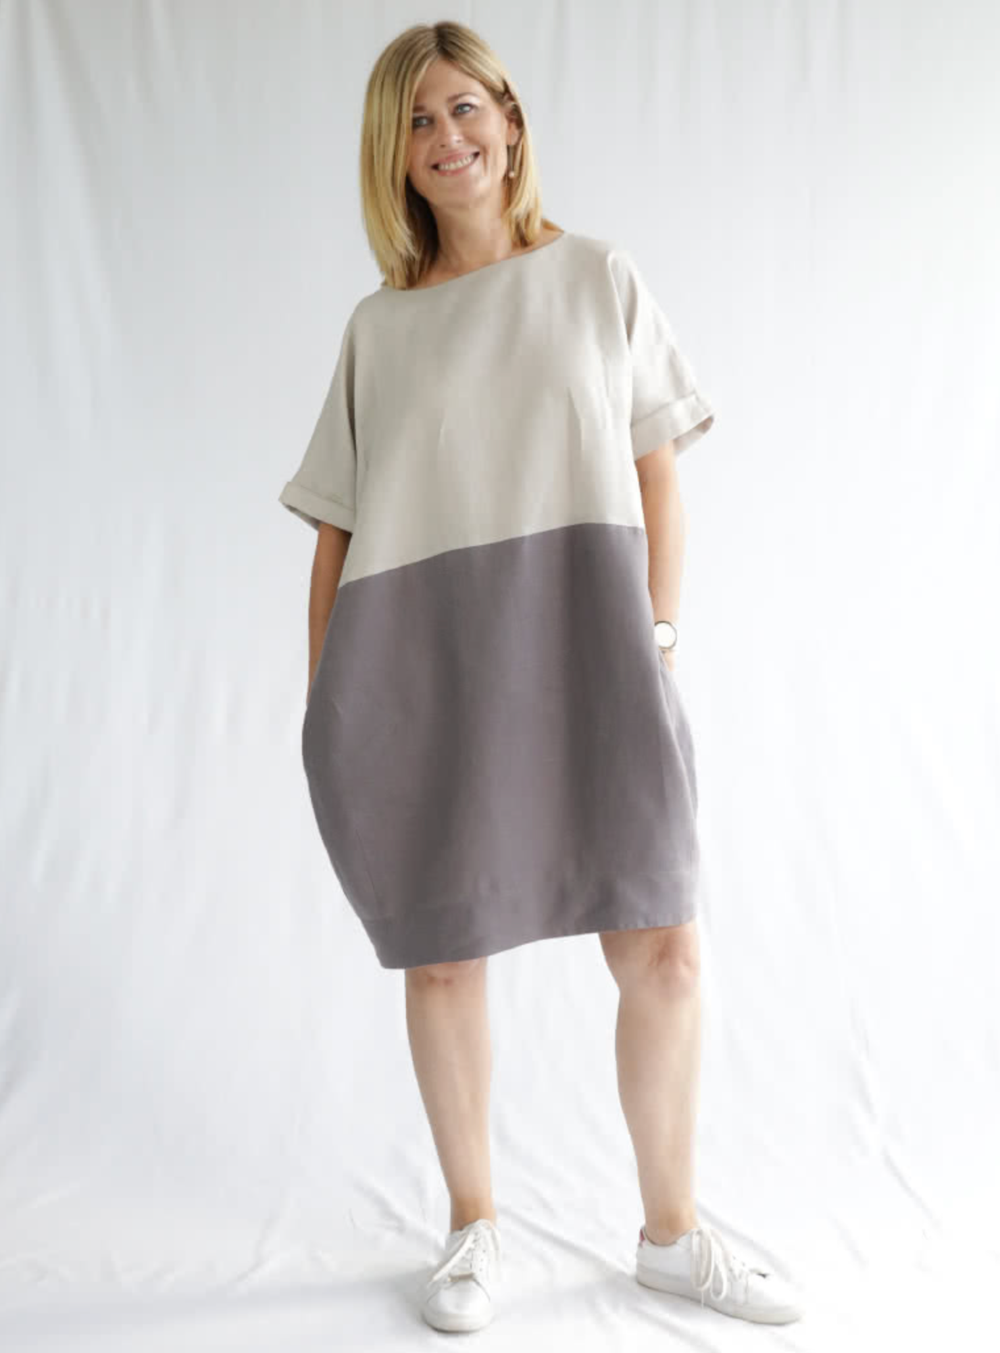 Woman wearing the Eme Dress sewing pattern from Style Arc on The Fold Line. A dress pattern made in silk, rayon, cotton, fine wool or linen fabrics, featuring a loose-fit, cocoon-shape, knee length, boat neck, short sleeves with cuffs and colour blocked.